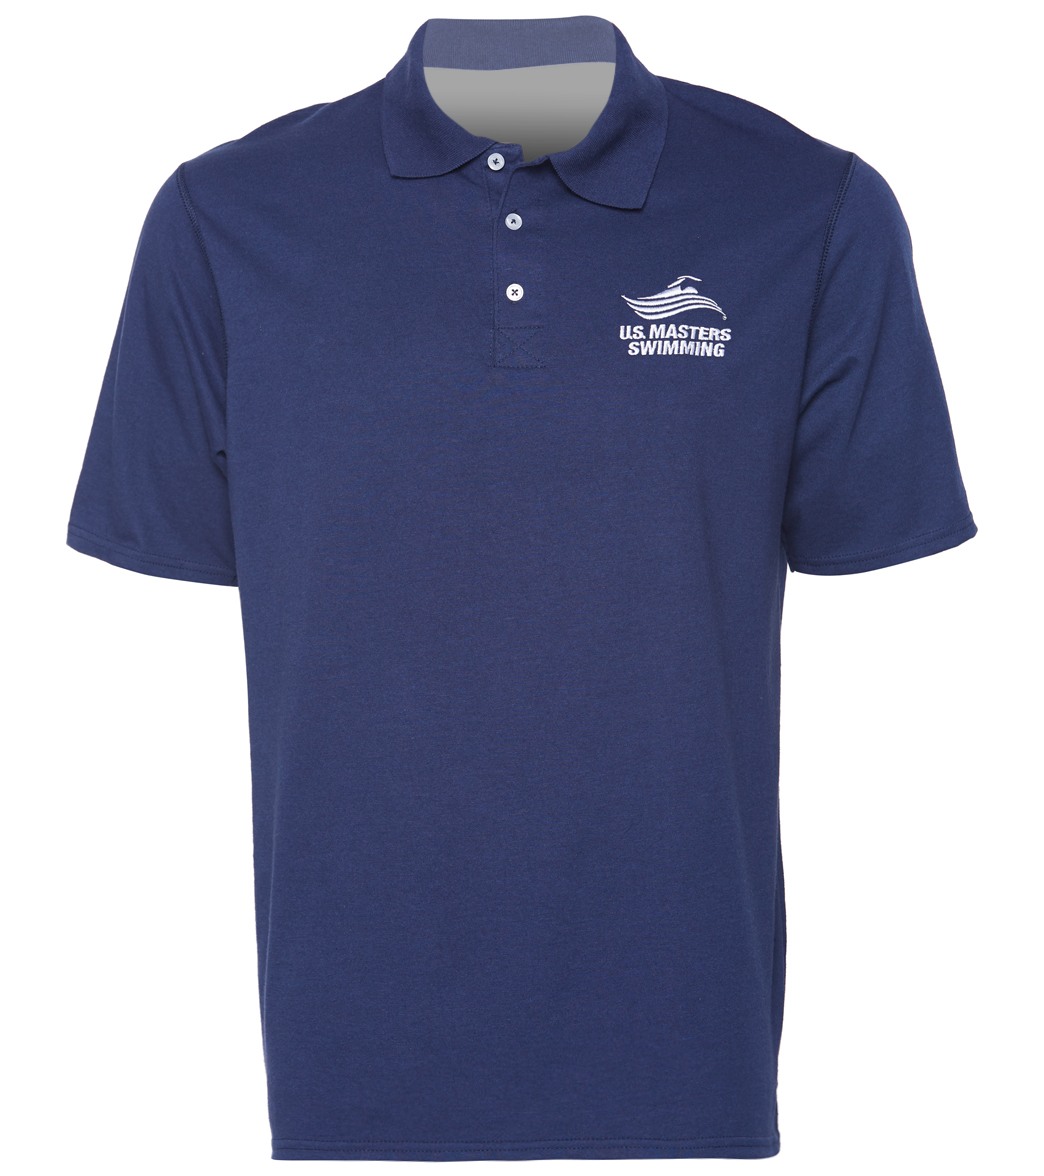 U.s. Masters Swimming Usms Men's Performance Polo Shirt - Navy Large Cotton/Polyester - Swimoutlet.com